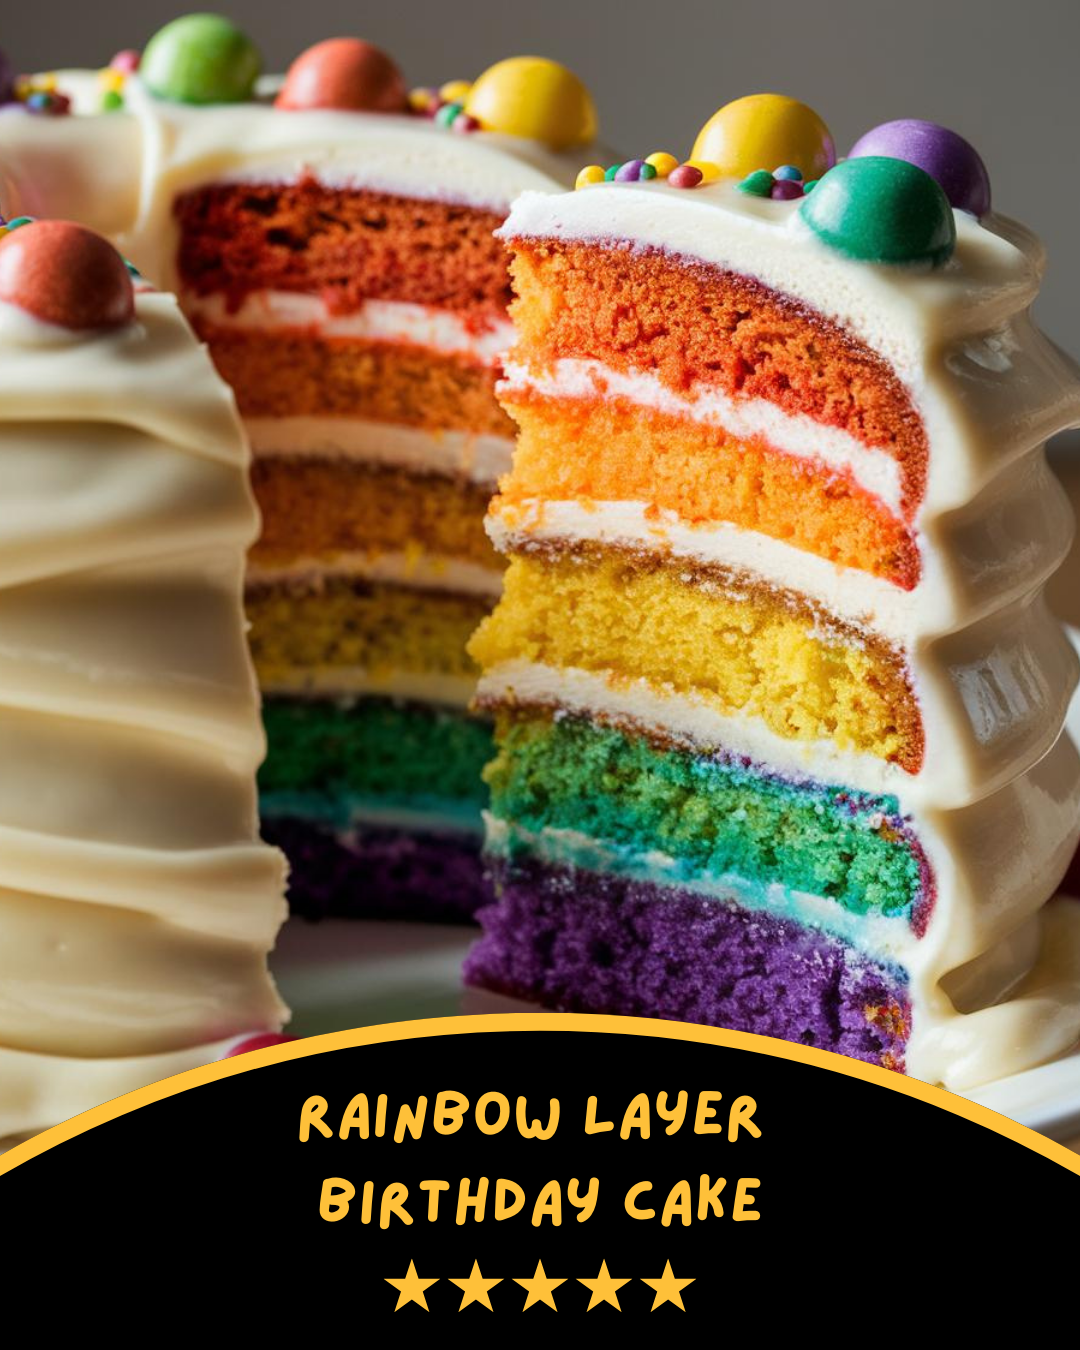 🎉 Looking for the perfect centerpiece for your next birthday bash? Look no further! Our Multi-Layer Rainbow Birthday Cake is not just a cake, it's a party in itself! 🎉